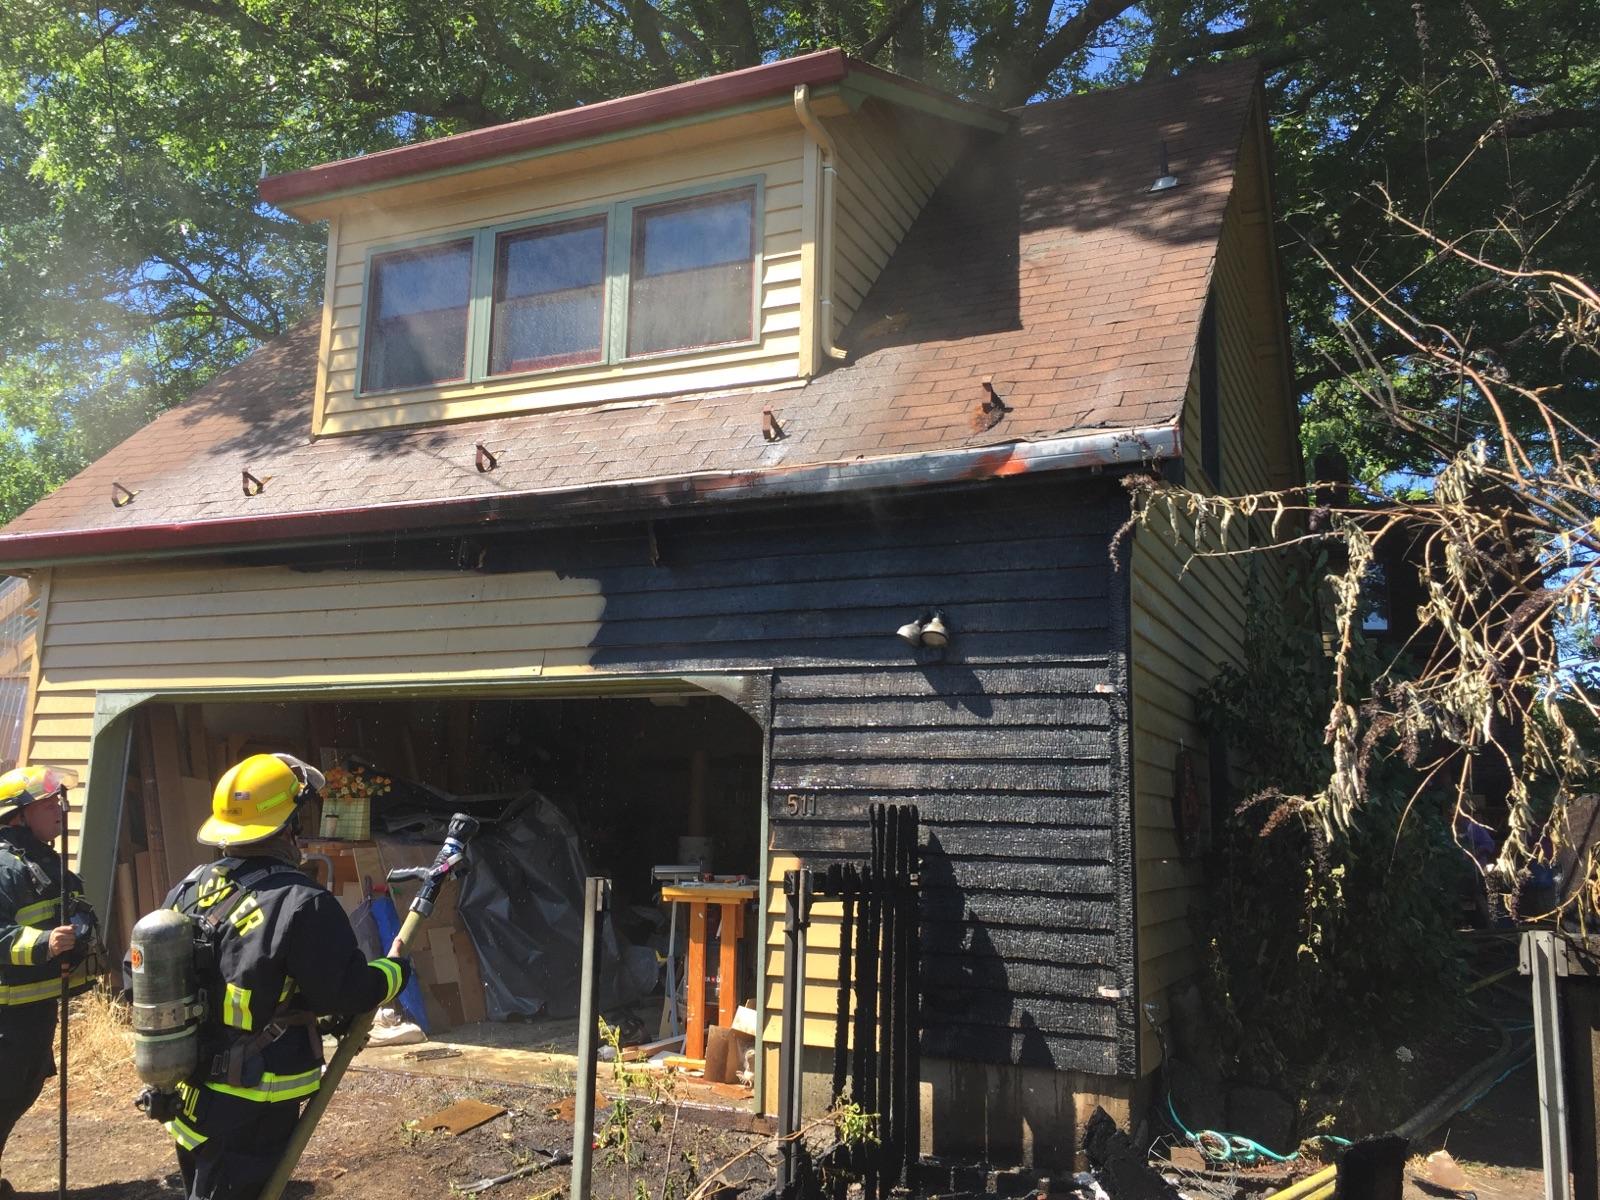 Fire damaged a garage and apartment Wednesday at 511 W 21st St. in Vancouver's Hough neighborhood.